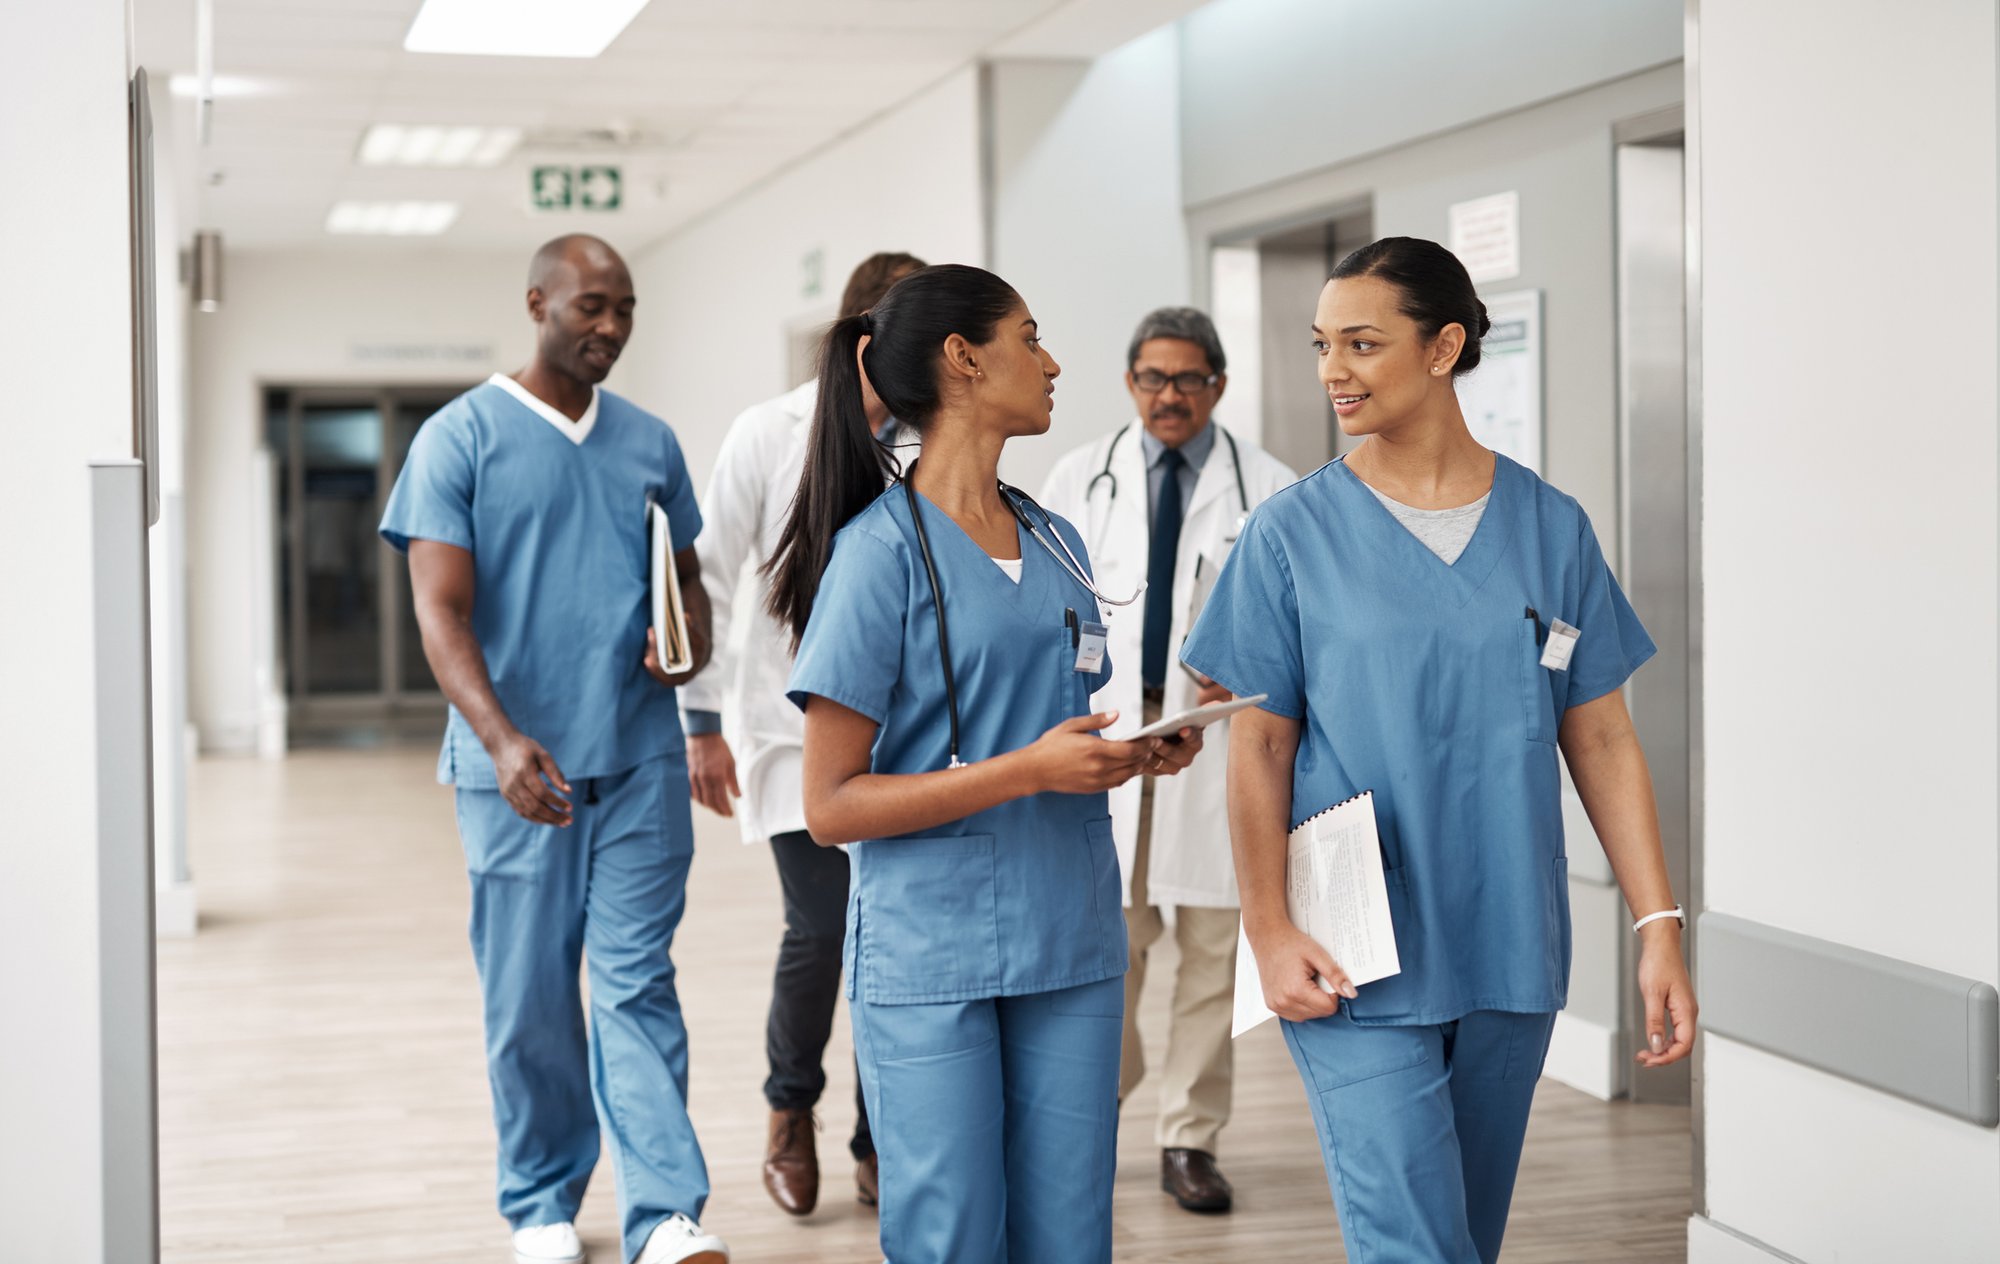 Group of five health care workers walking down a hallway